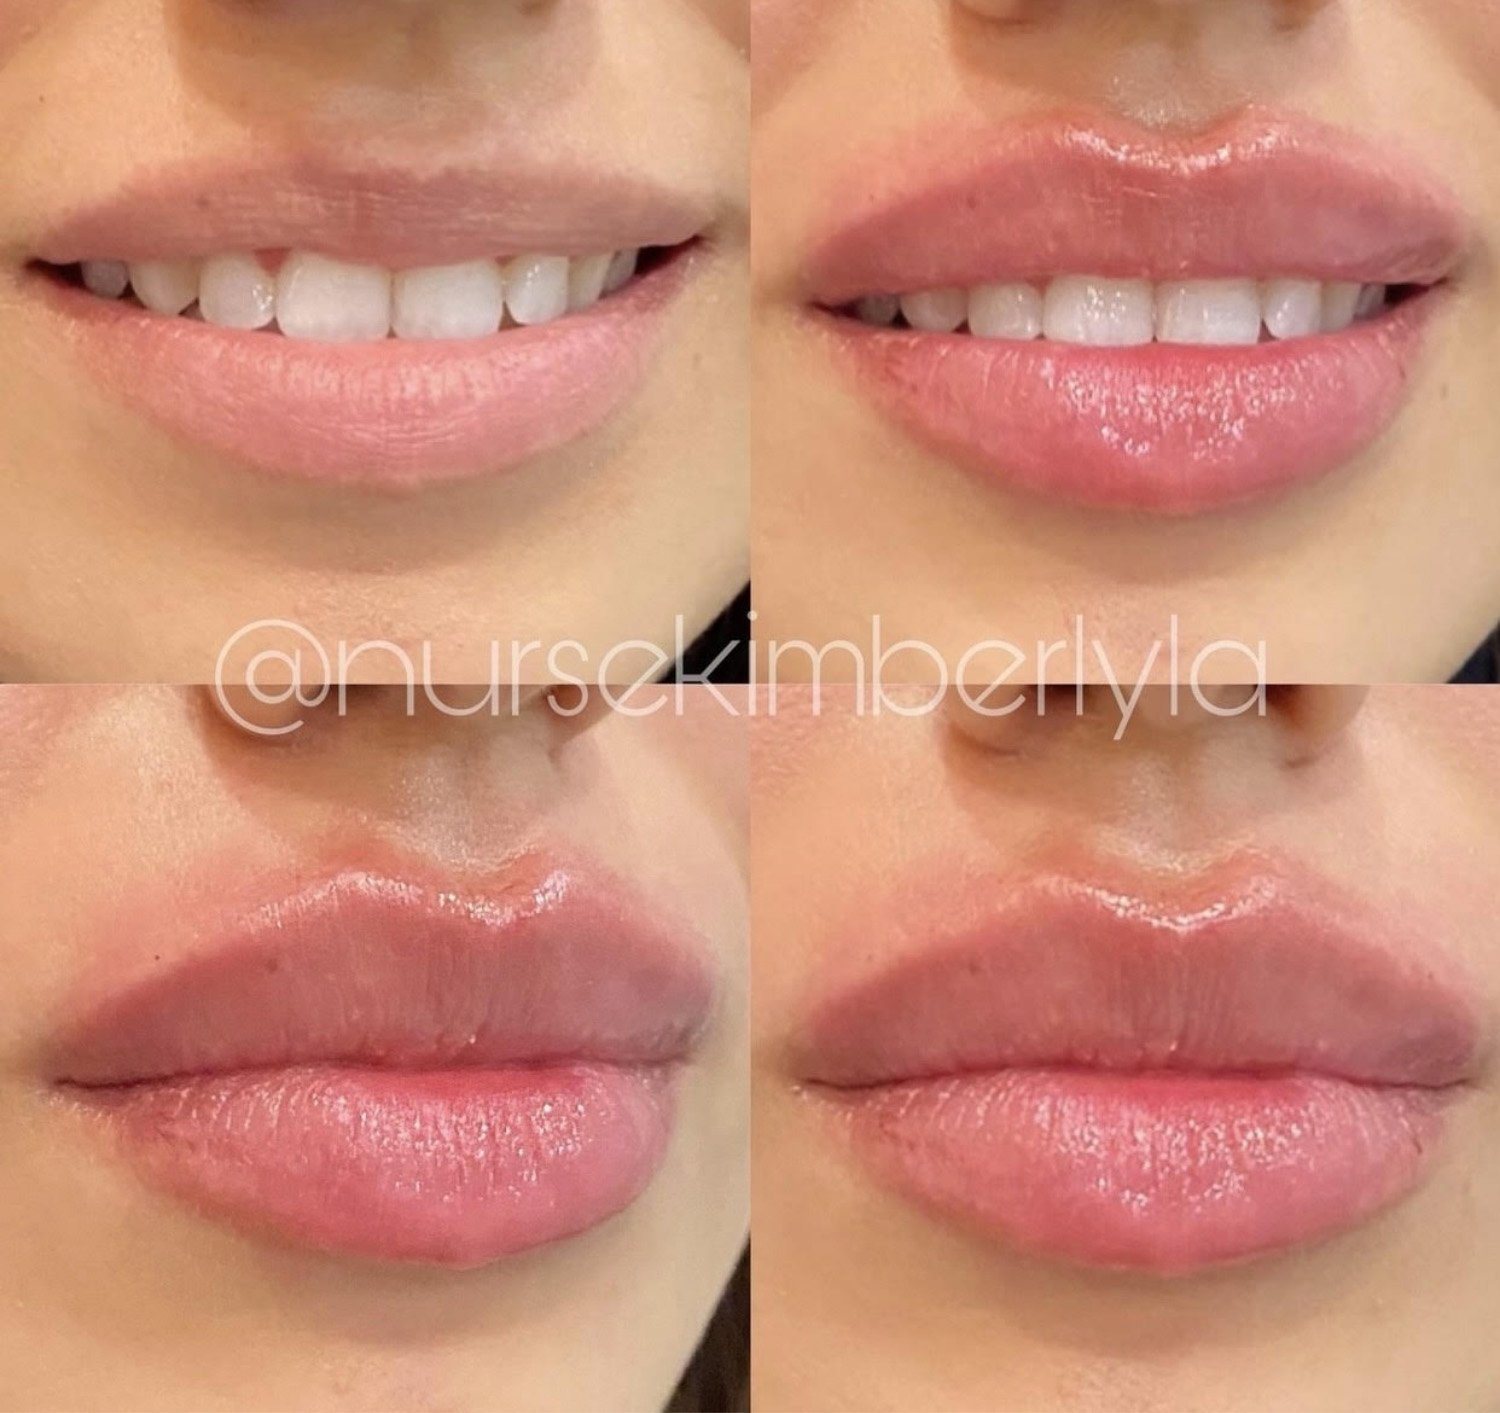 Kimberly lip botox before and after.jpg